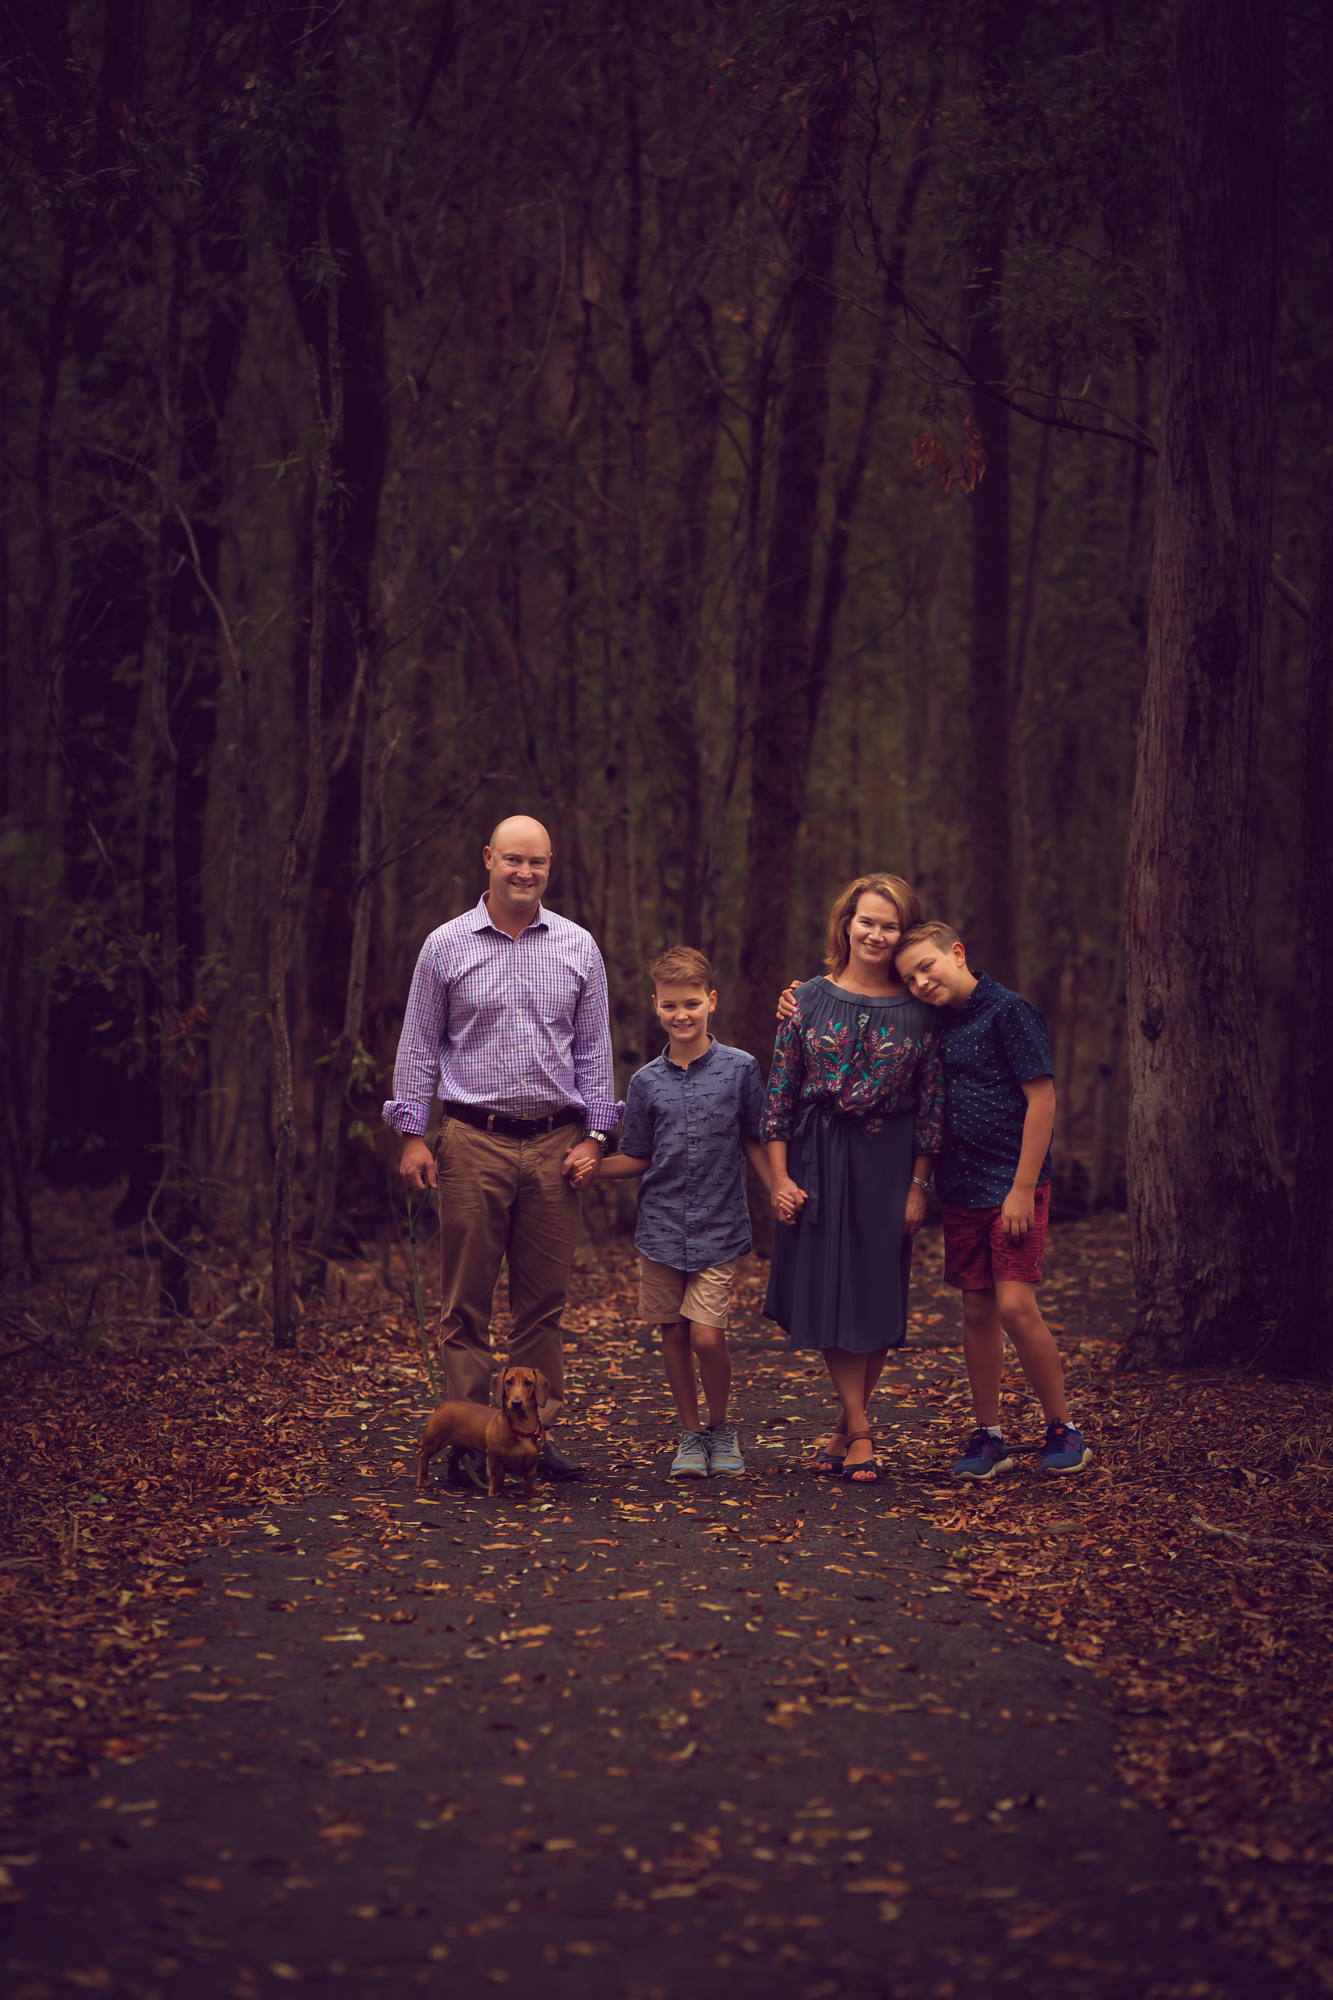 Where are the Best Family Photography Locations in Brisbane?